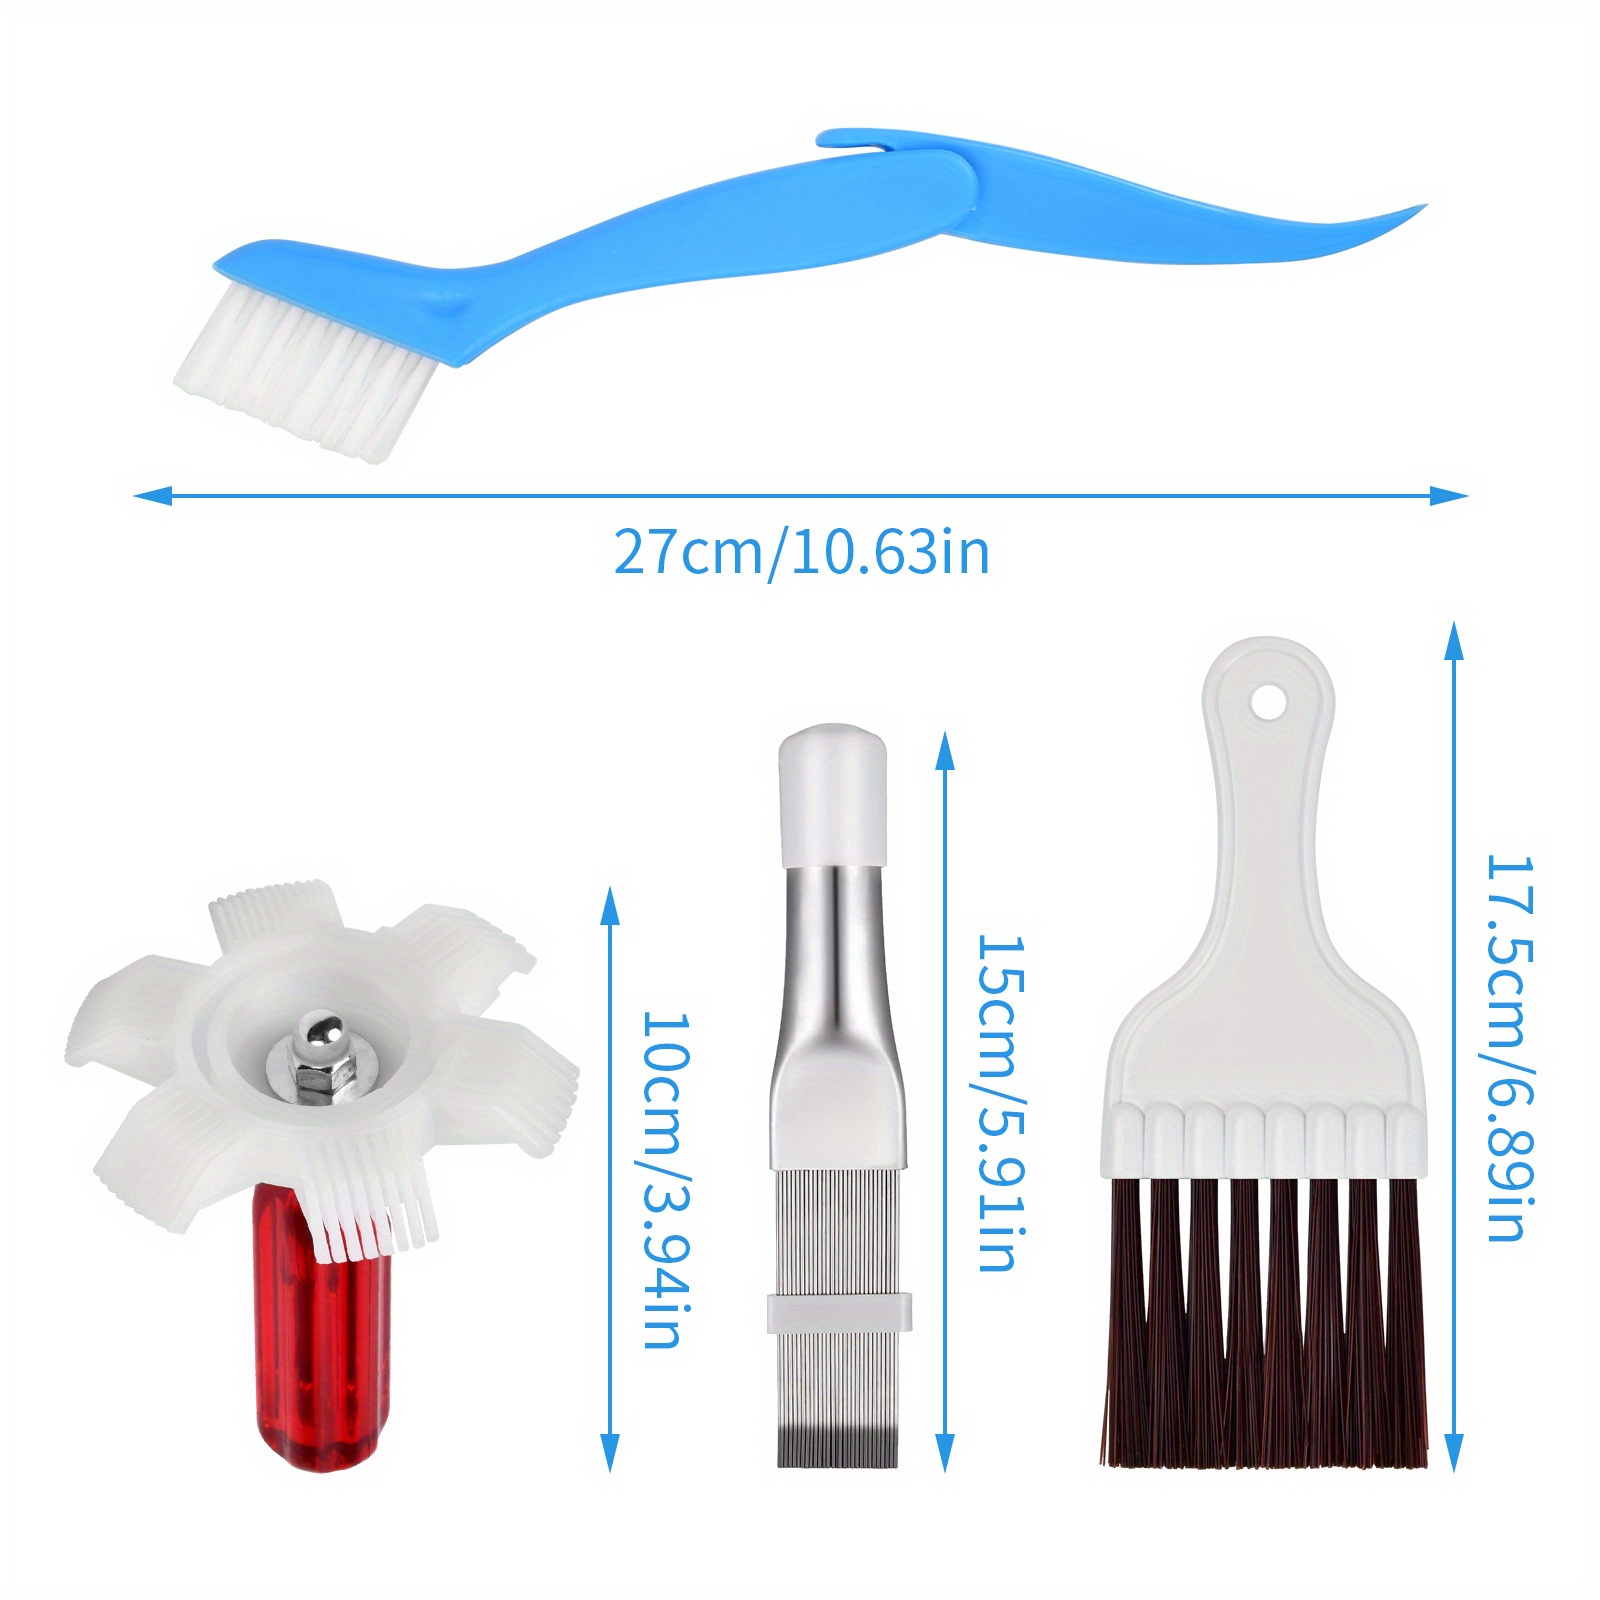 4Pcs Air Conditioner Condenser Fin Cleaning Brush And Comb Set Fin